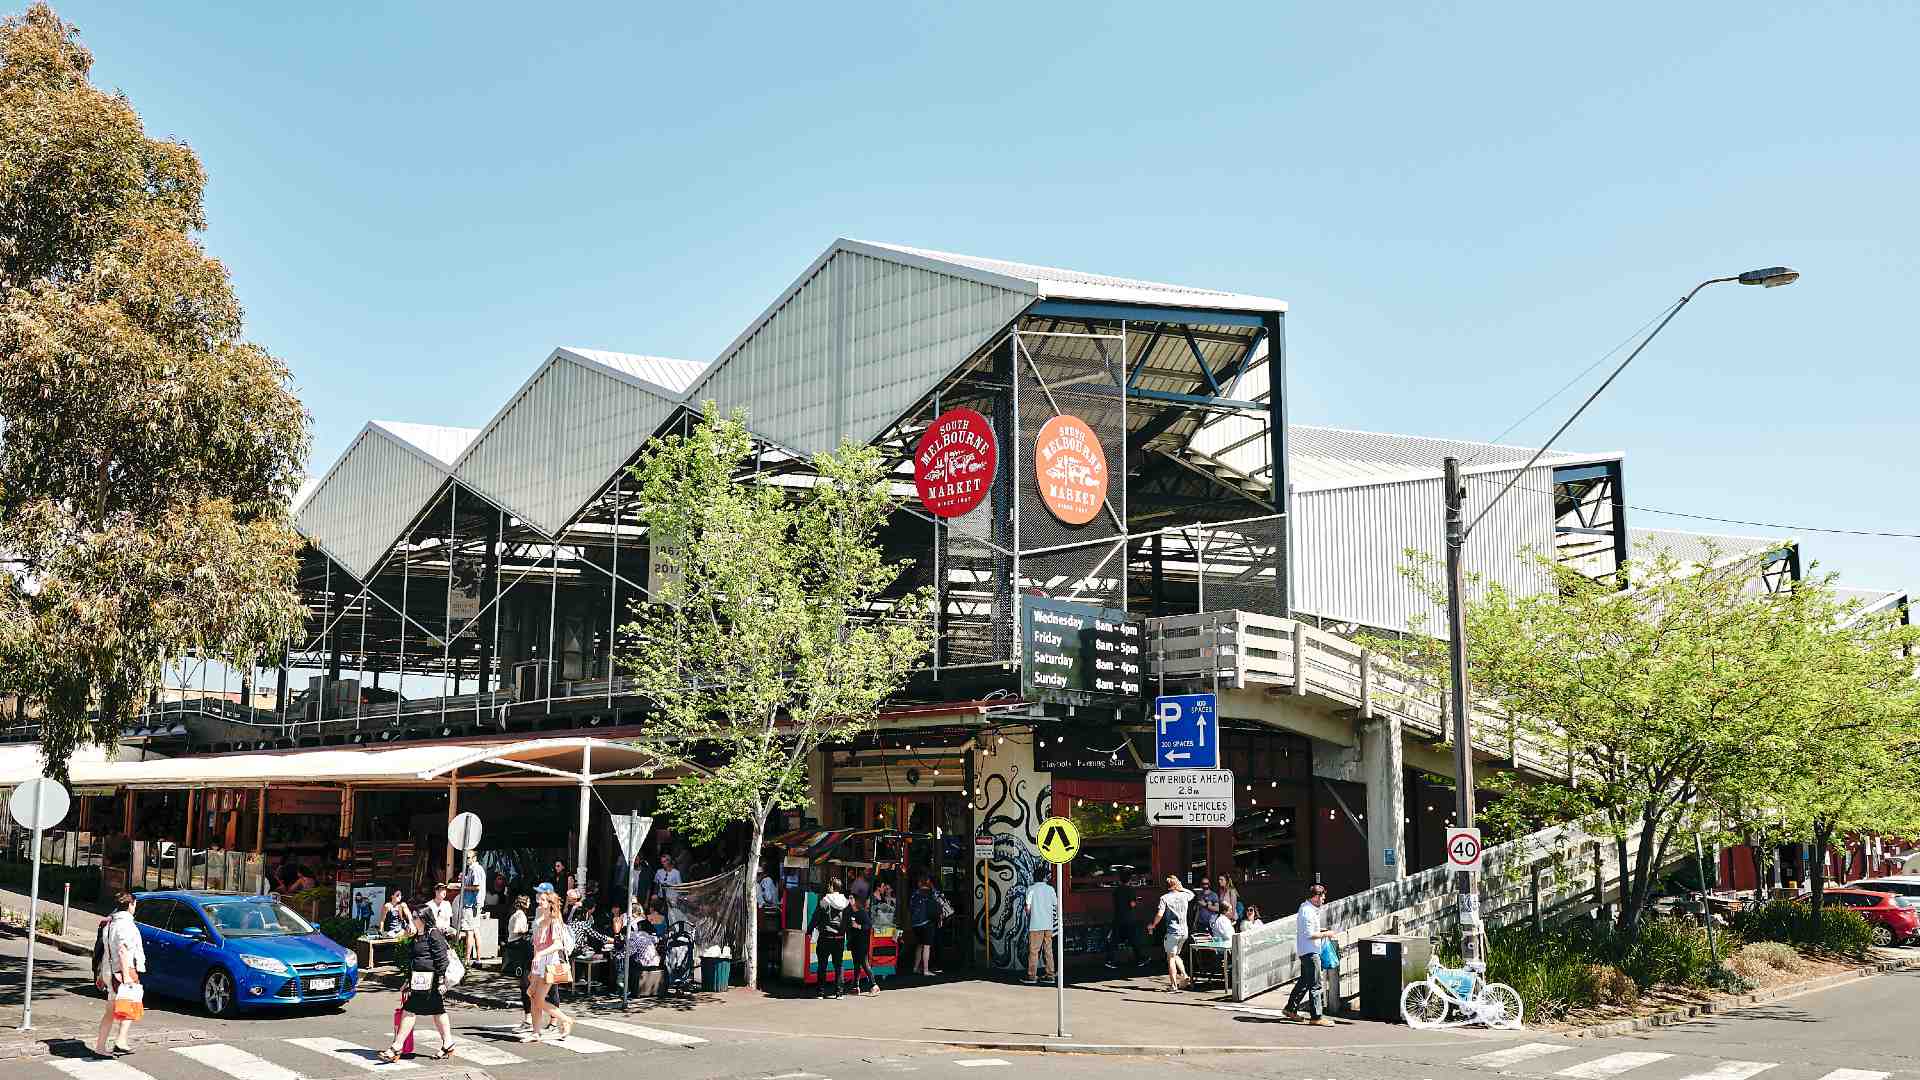 The exterior of South Melbourne Market